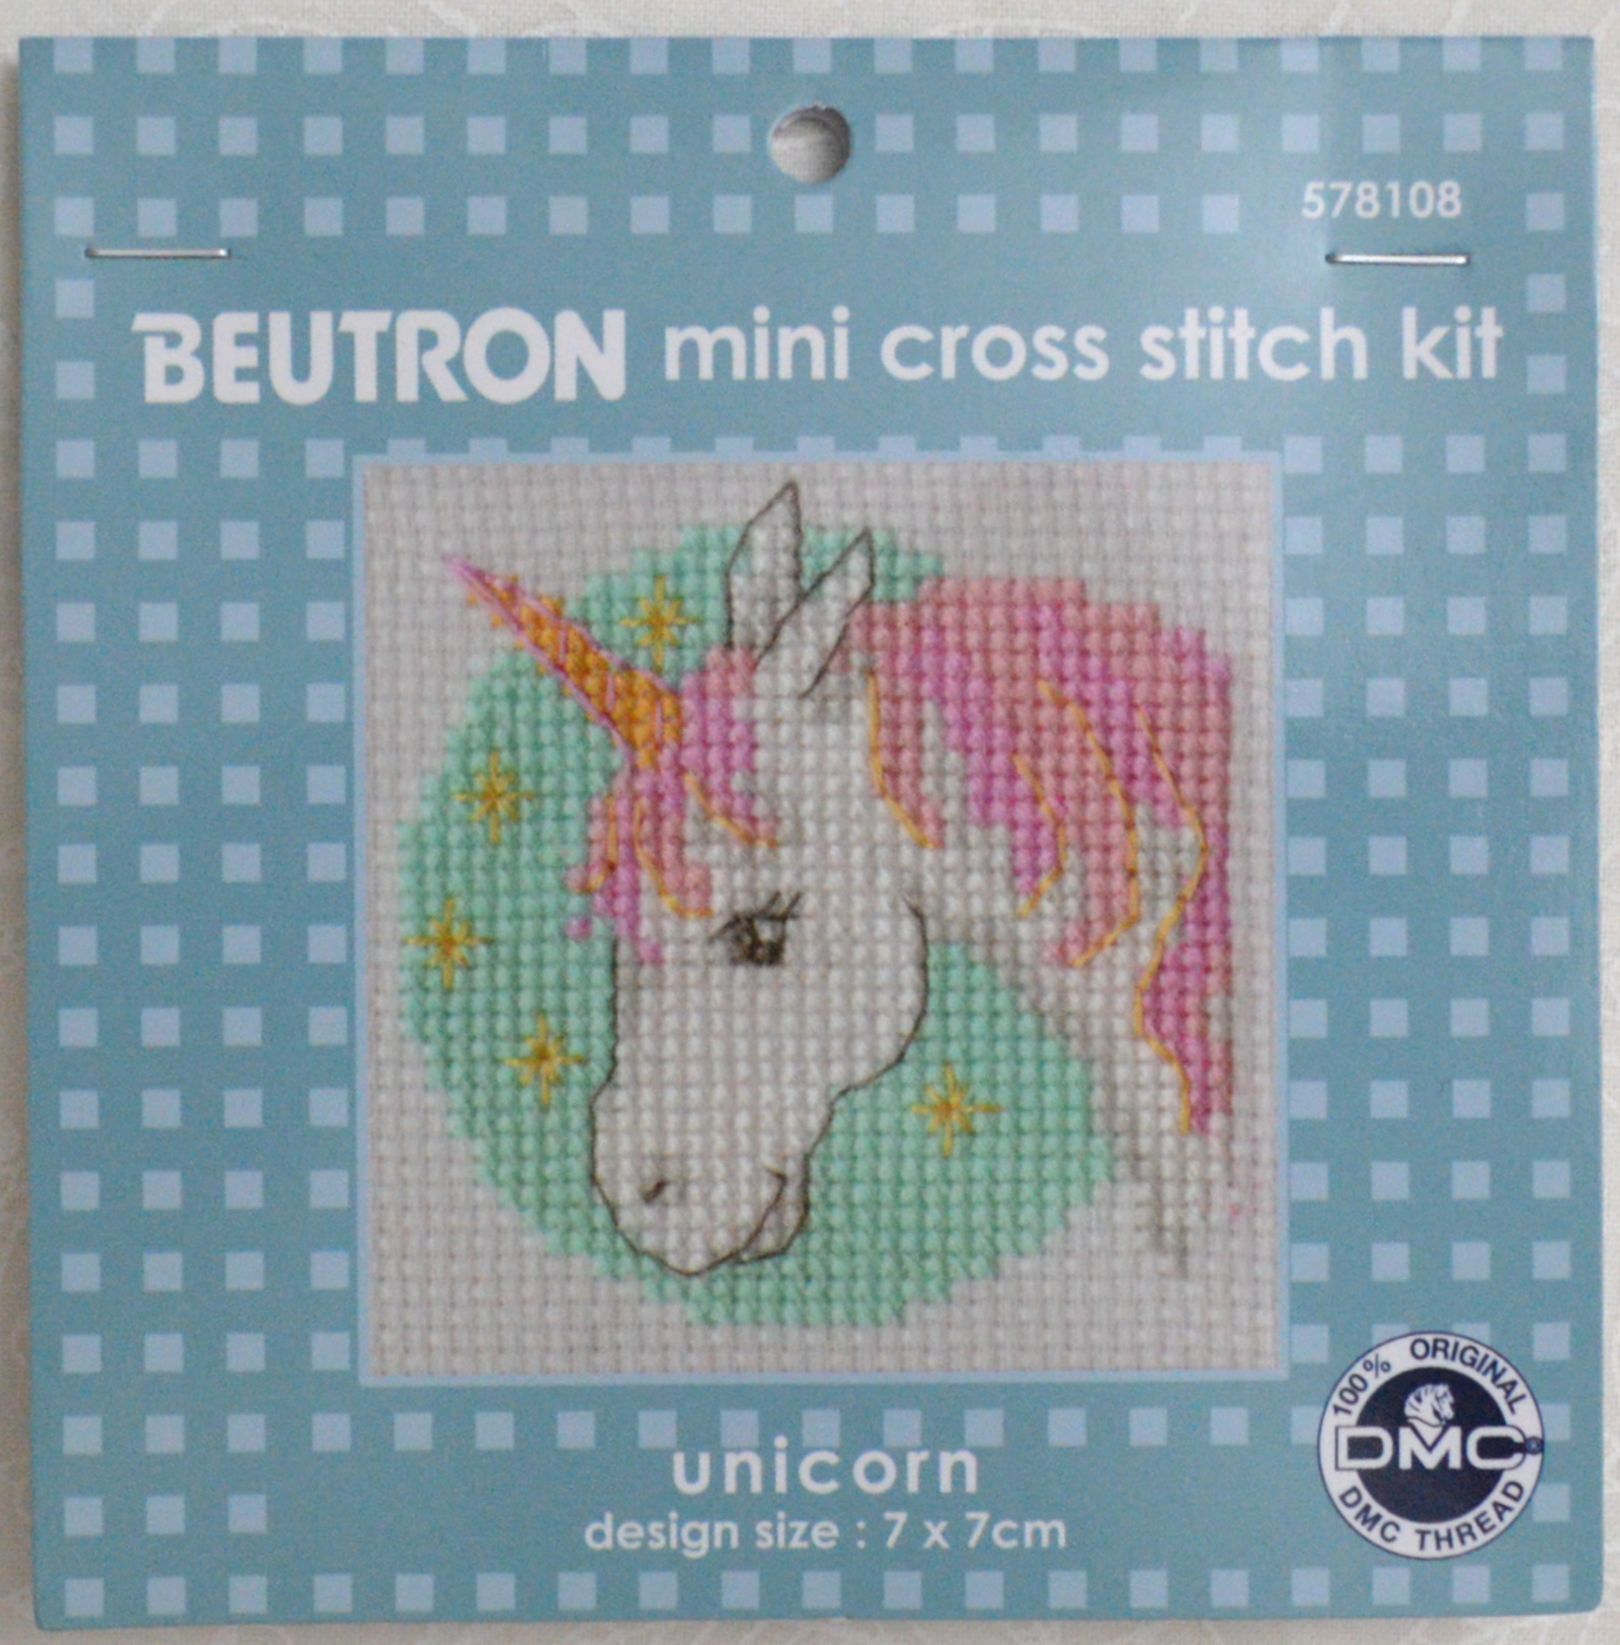 Unicorn Latch Hook Pouch and Heart Needlepoint Cross Body Bag Pre Printed Arts  and Crafts Sewing kit Pink